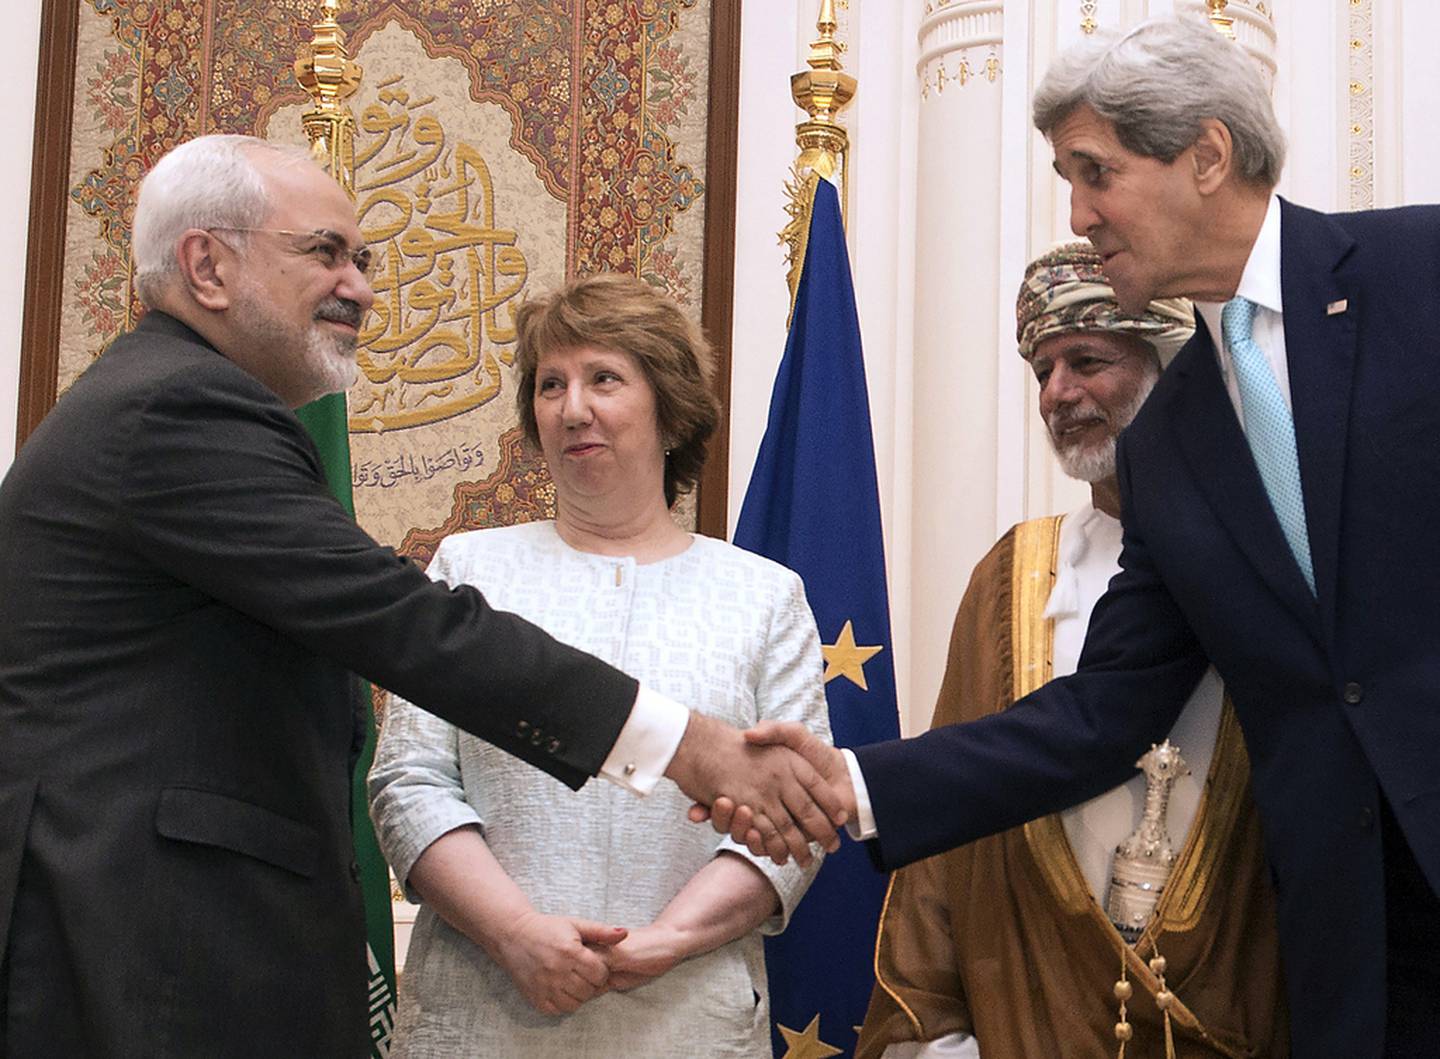 US Secretary of State John Kerry, right, greets Iranian Foreign Minister Javad Zarif in 2009 in Muscat, as Omani minister responsible for foreign affairs Yussef bin Alawi and former EU diplomat Catherine Ashton look on. AFP